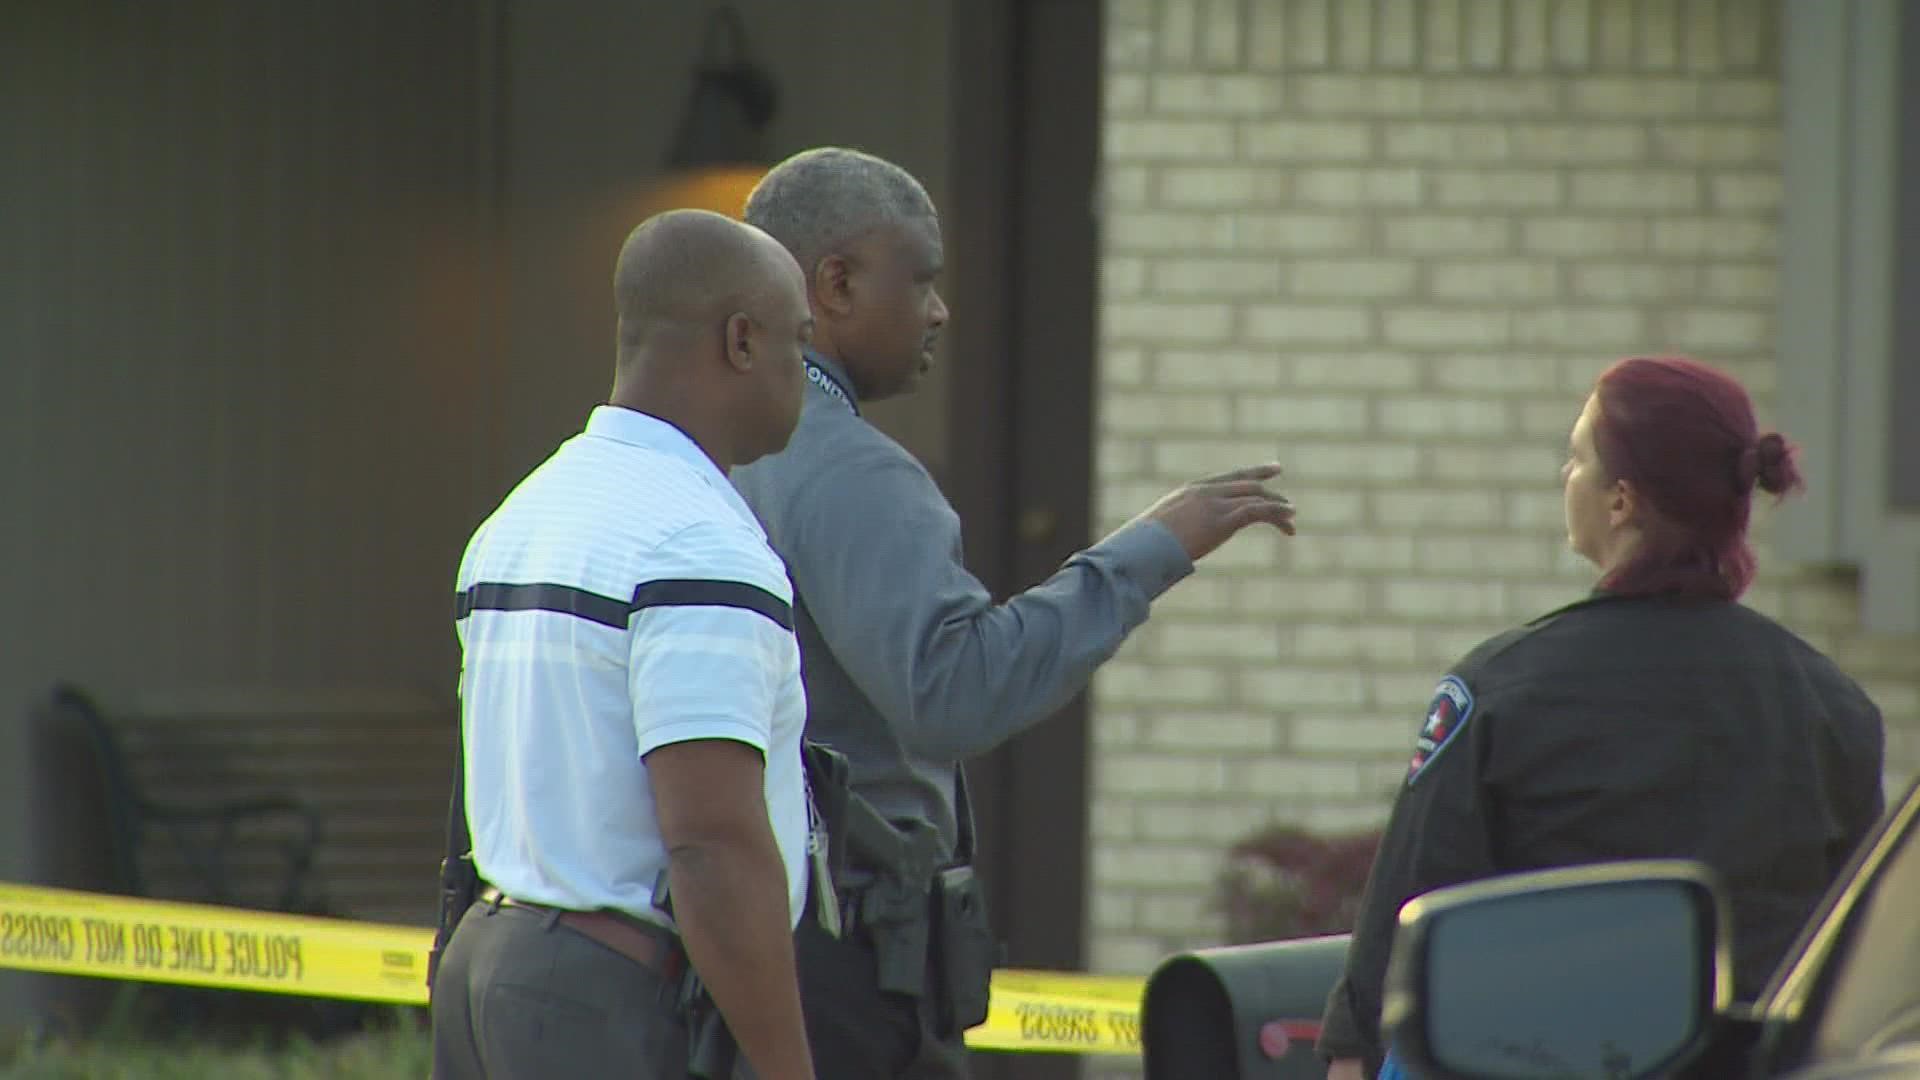 Police are investigating the shooting deaths of two men at an Arlington home early Monday.